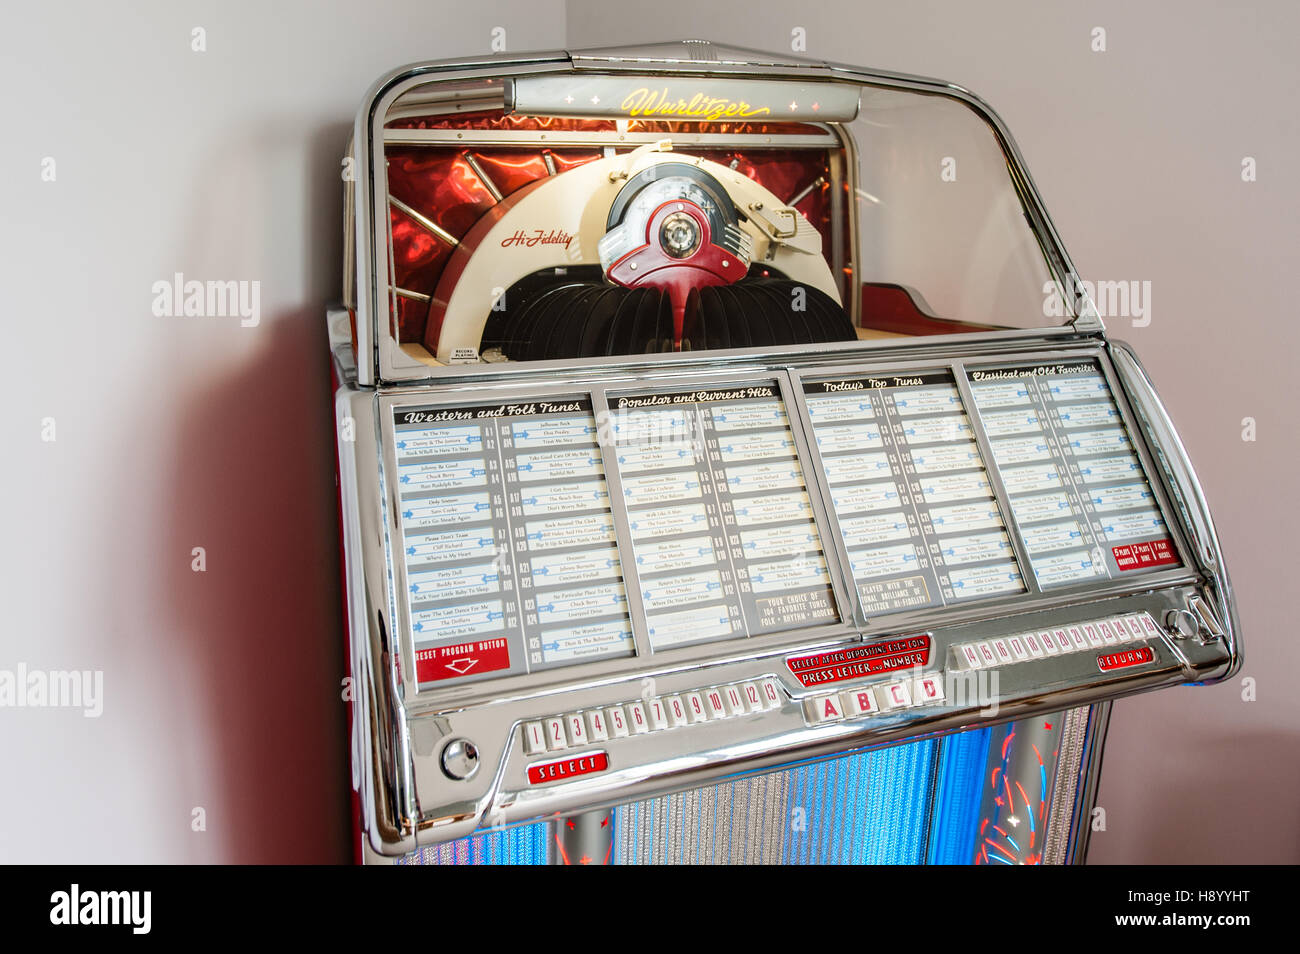 An 1800 Wurlitzer jukebox made in the 1950's. Stock Photo